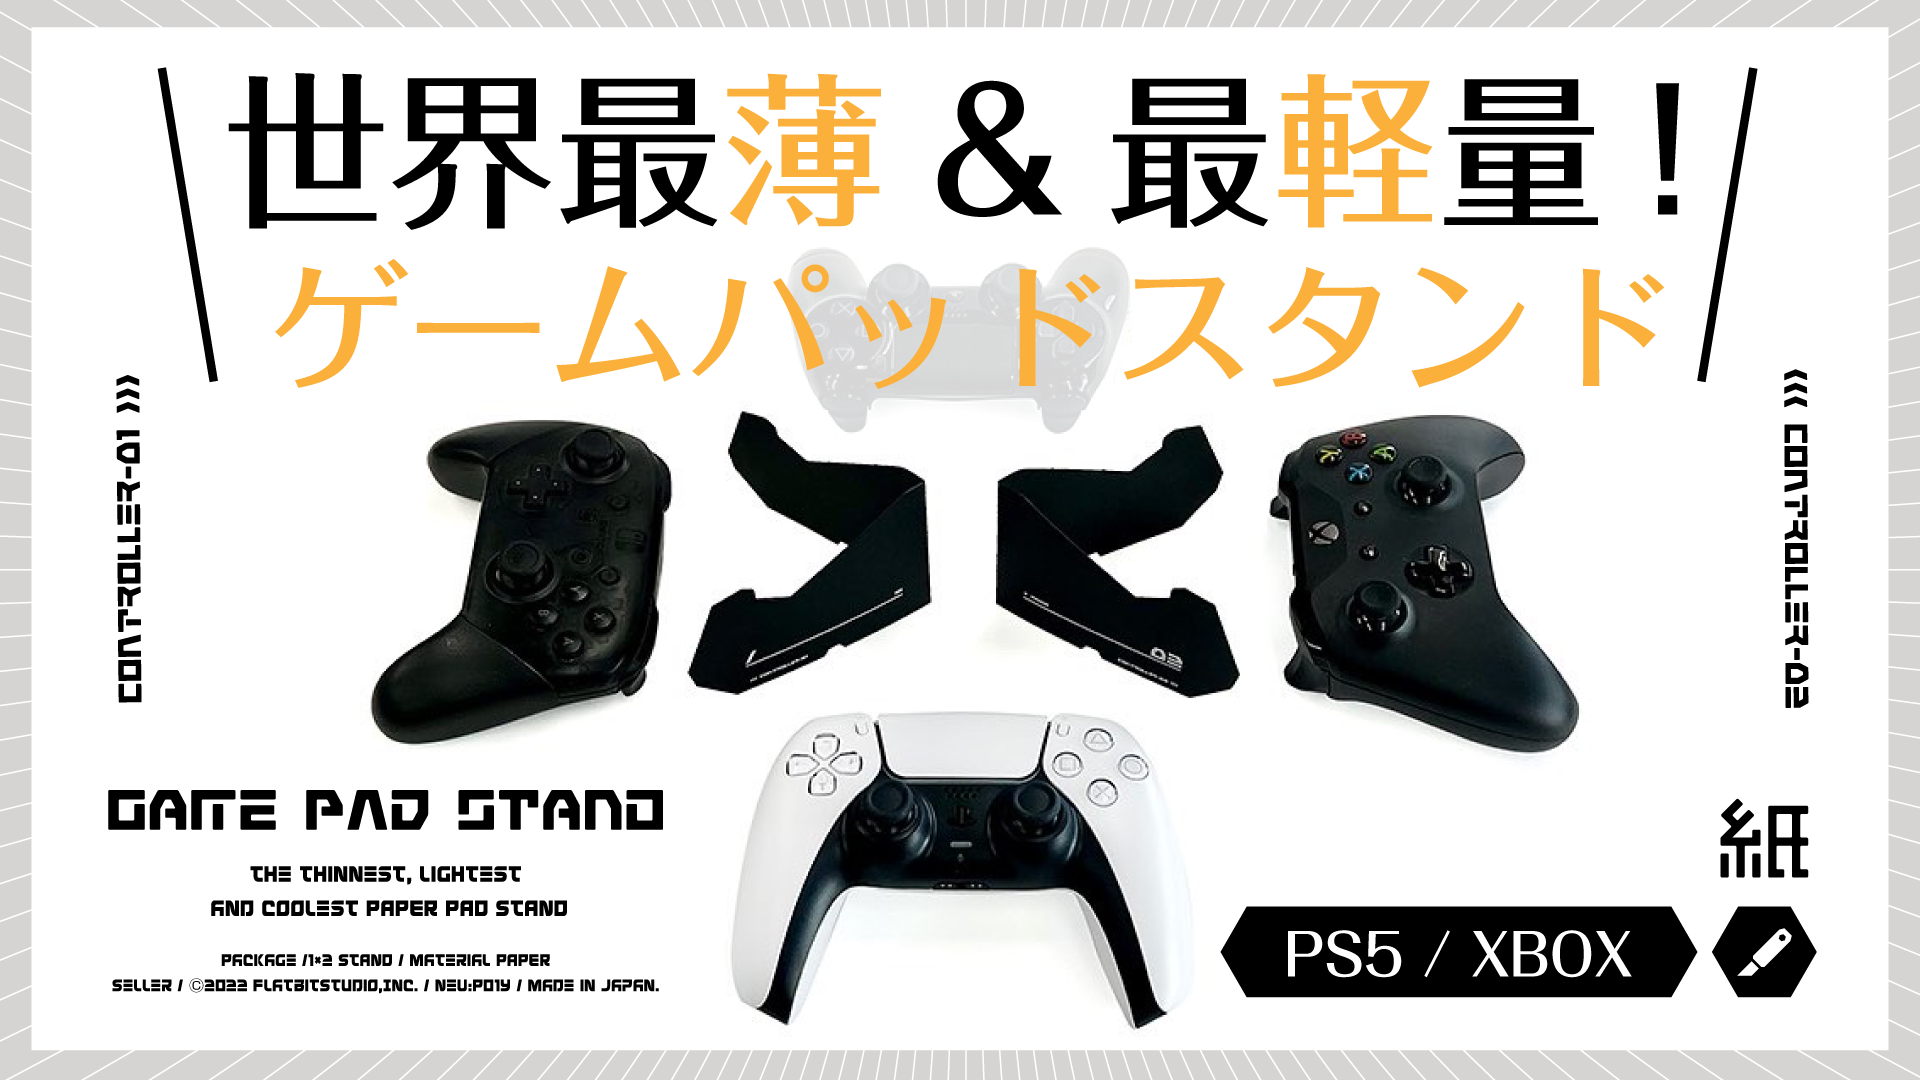 Load video: gamepad stand